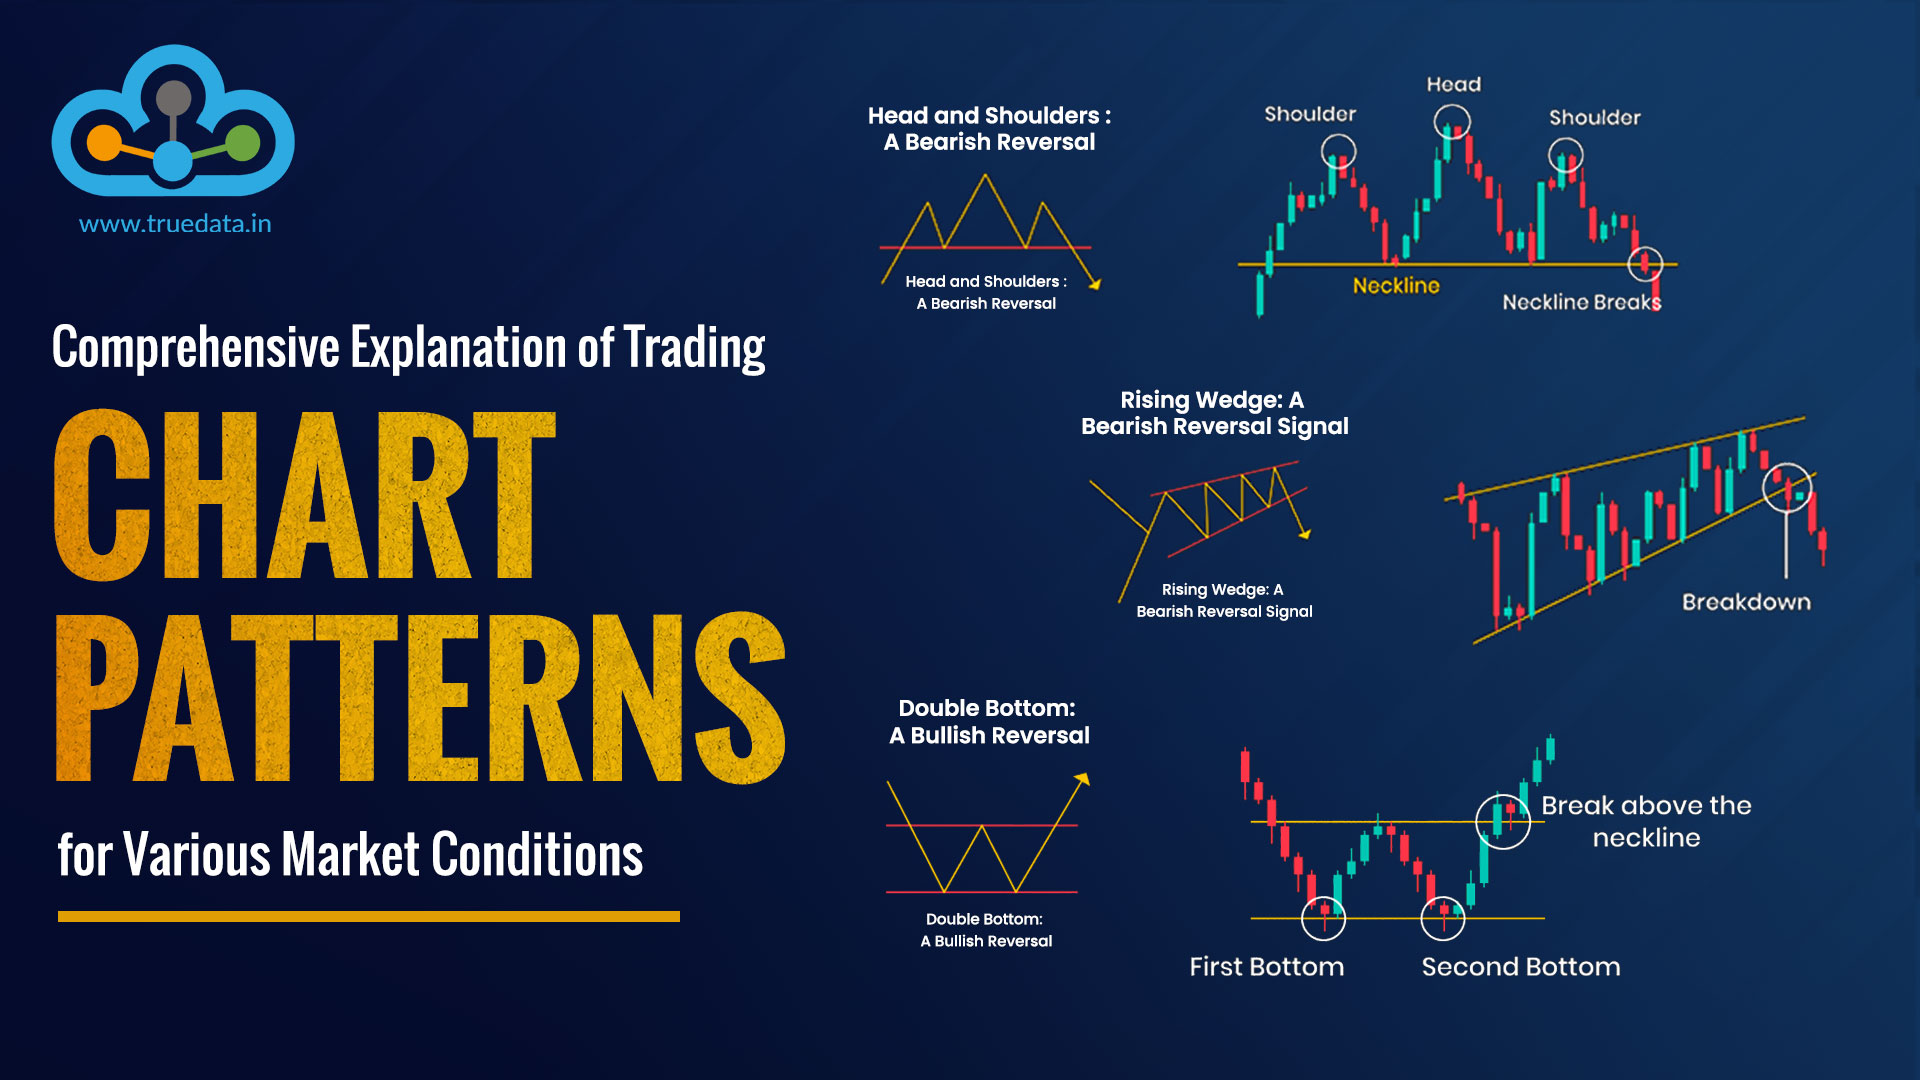 Head and Shoulders Pattern: Decode the Market Signal